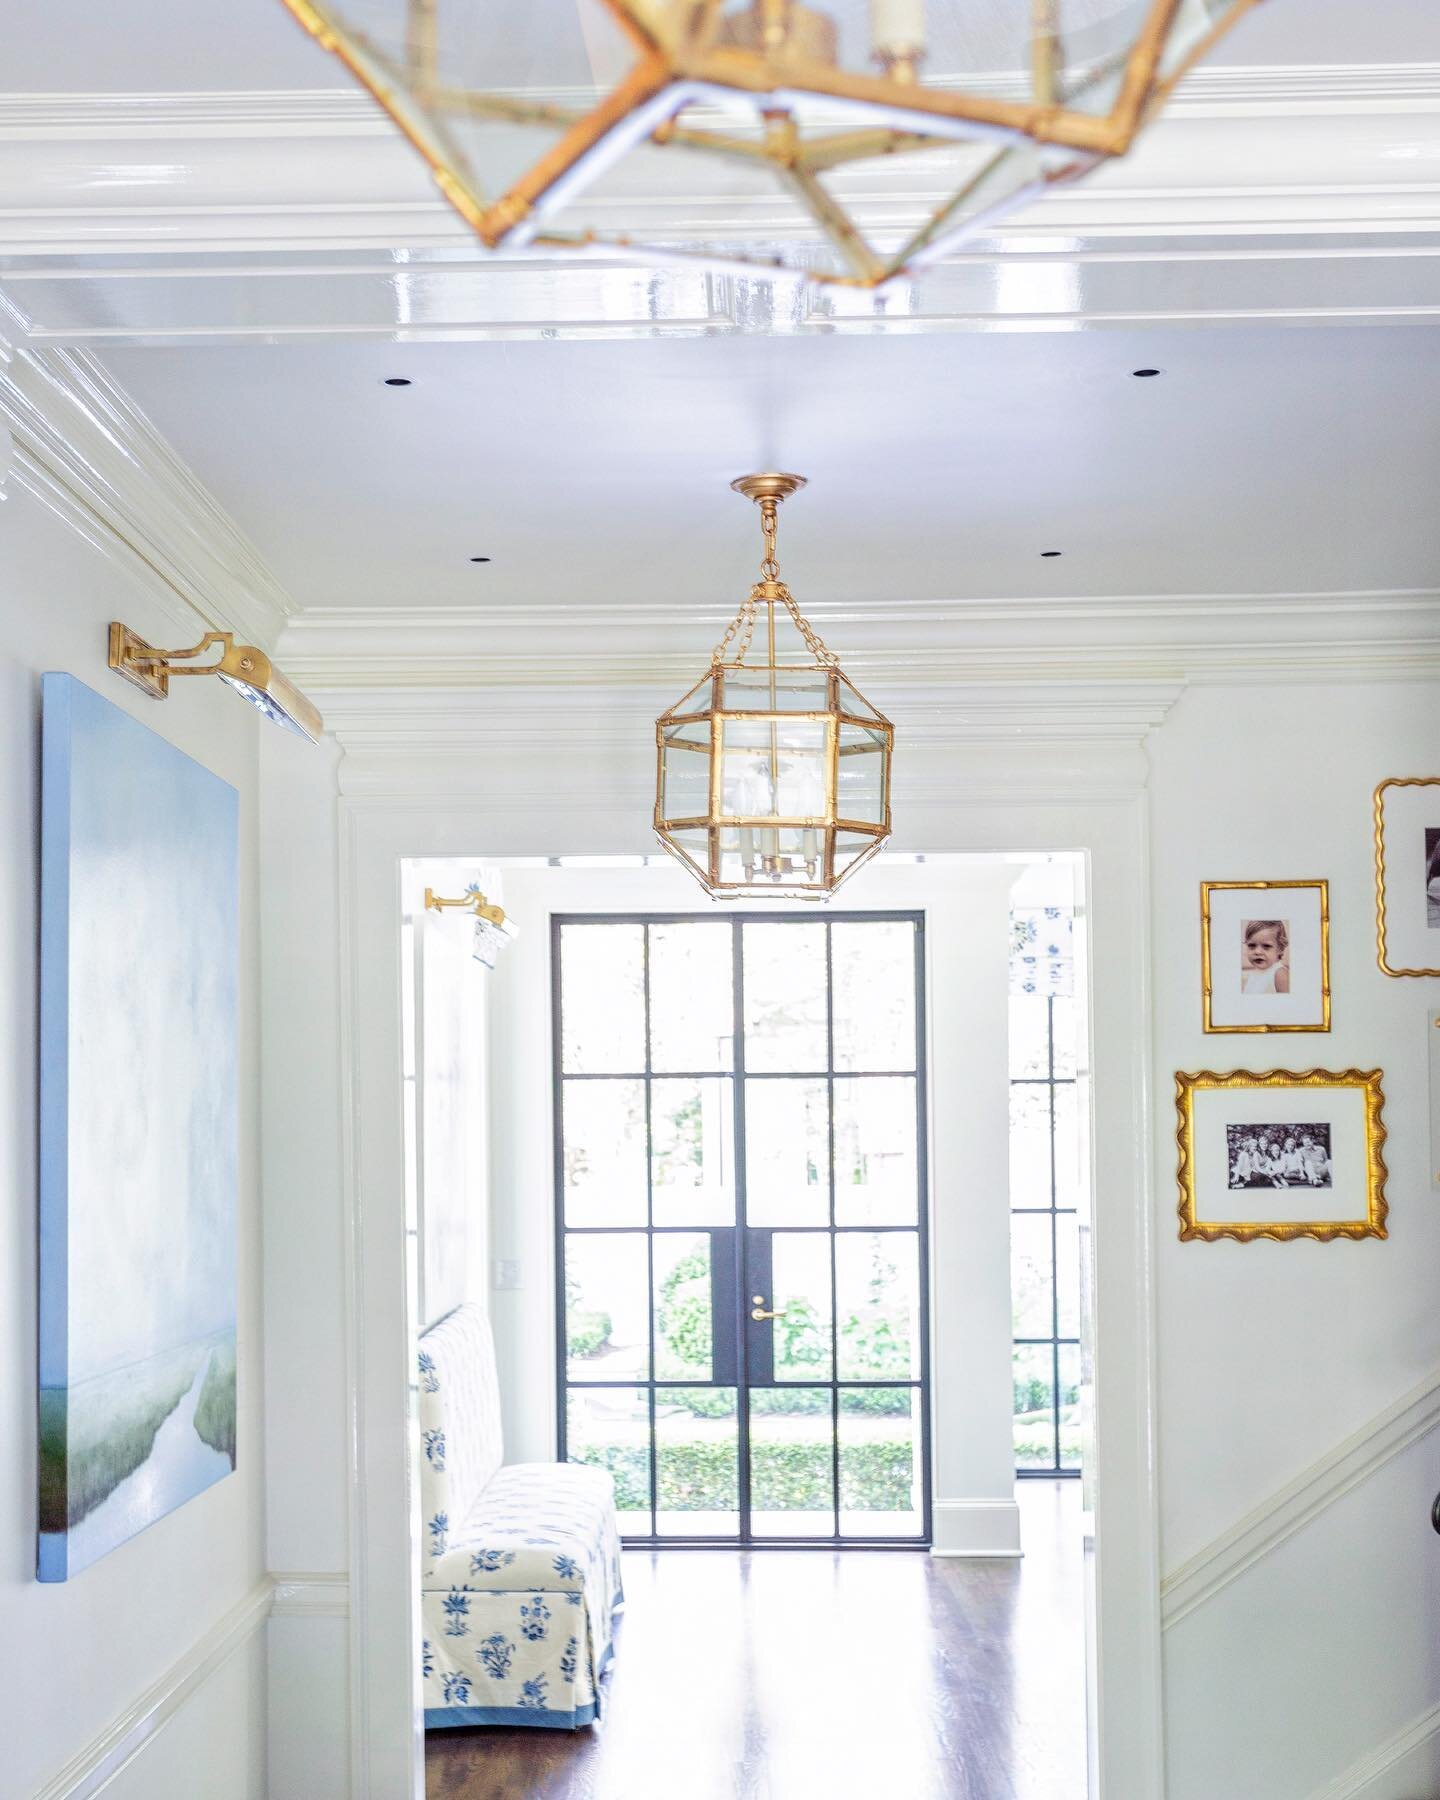 We used an eggshell finish on these ceilings to brighten and elevate the space. How do you like the light pick-up? 
.
.
.
.
.
#interiorpainting #interiorpainter #interiorpainters #eggshell #eggshellceiling #atlantapainter #atlantapainters #houseinspi